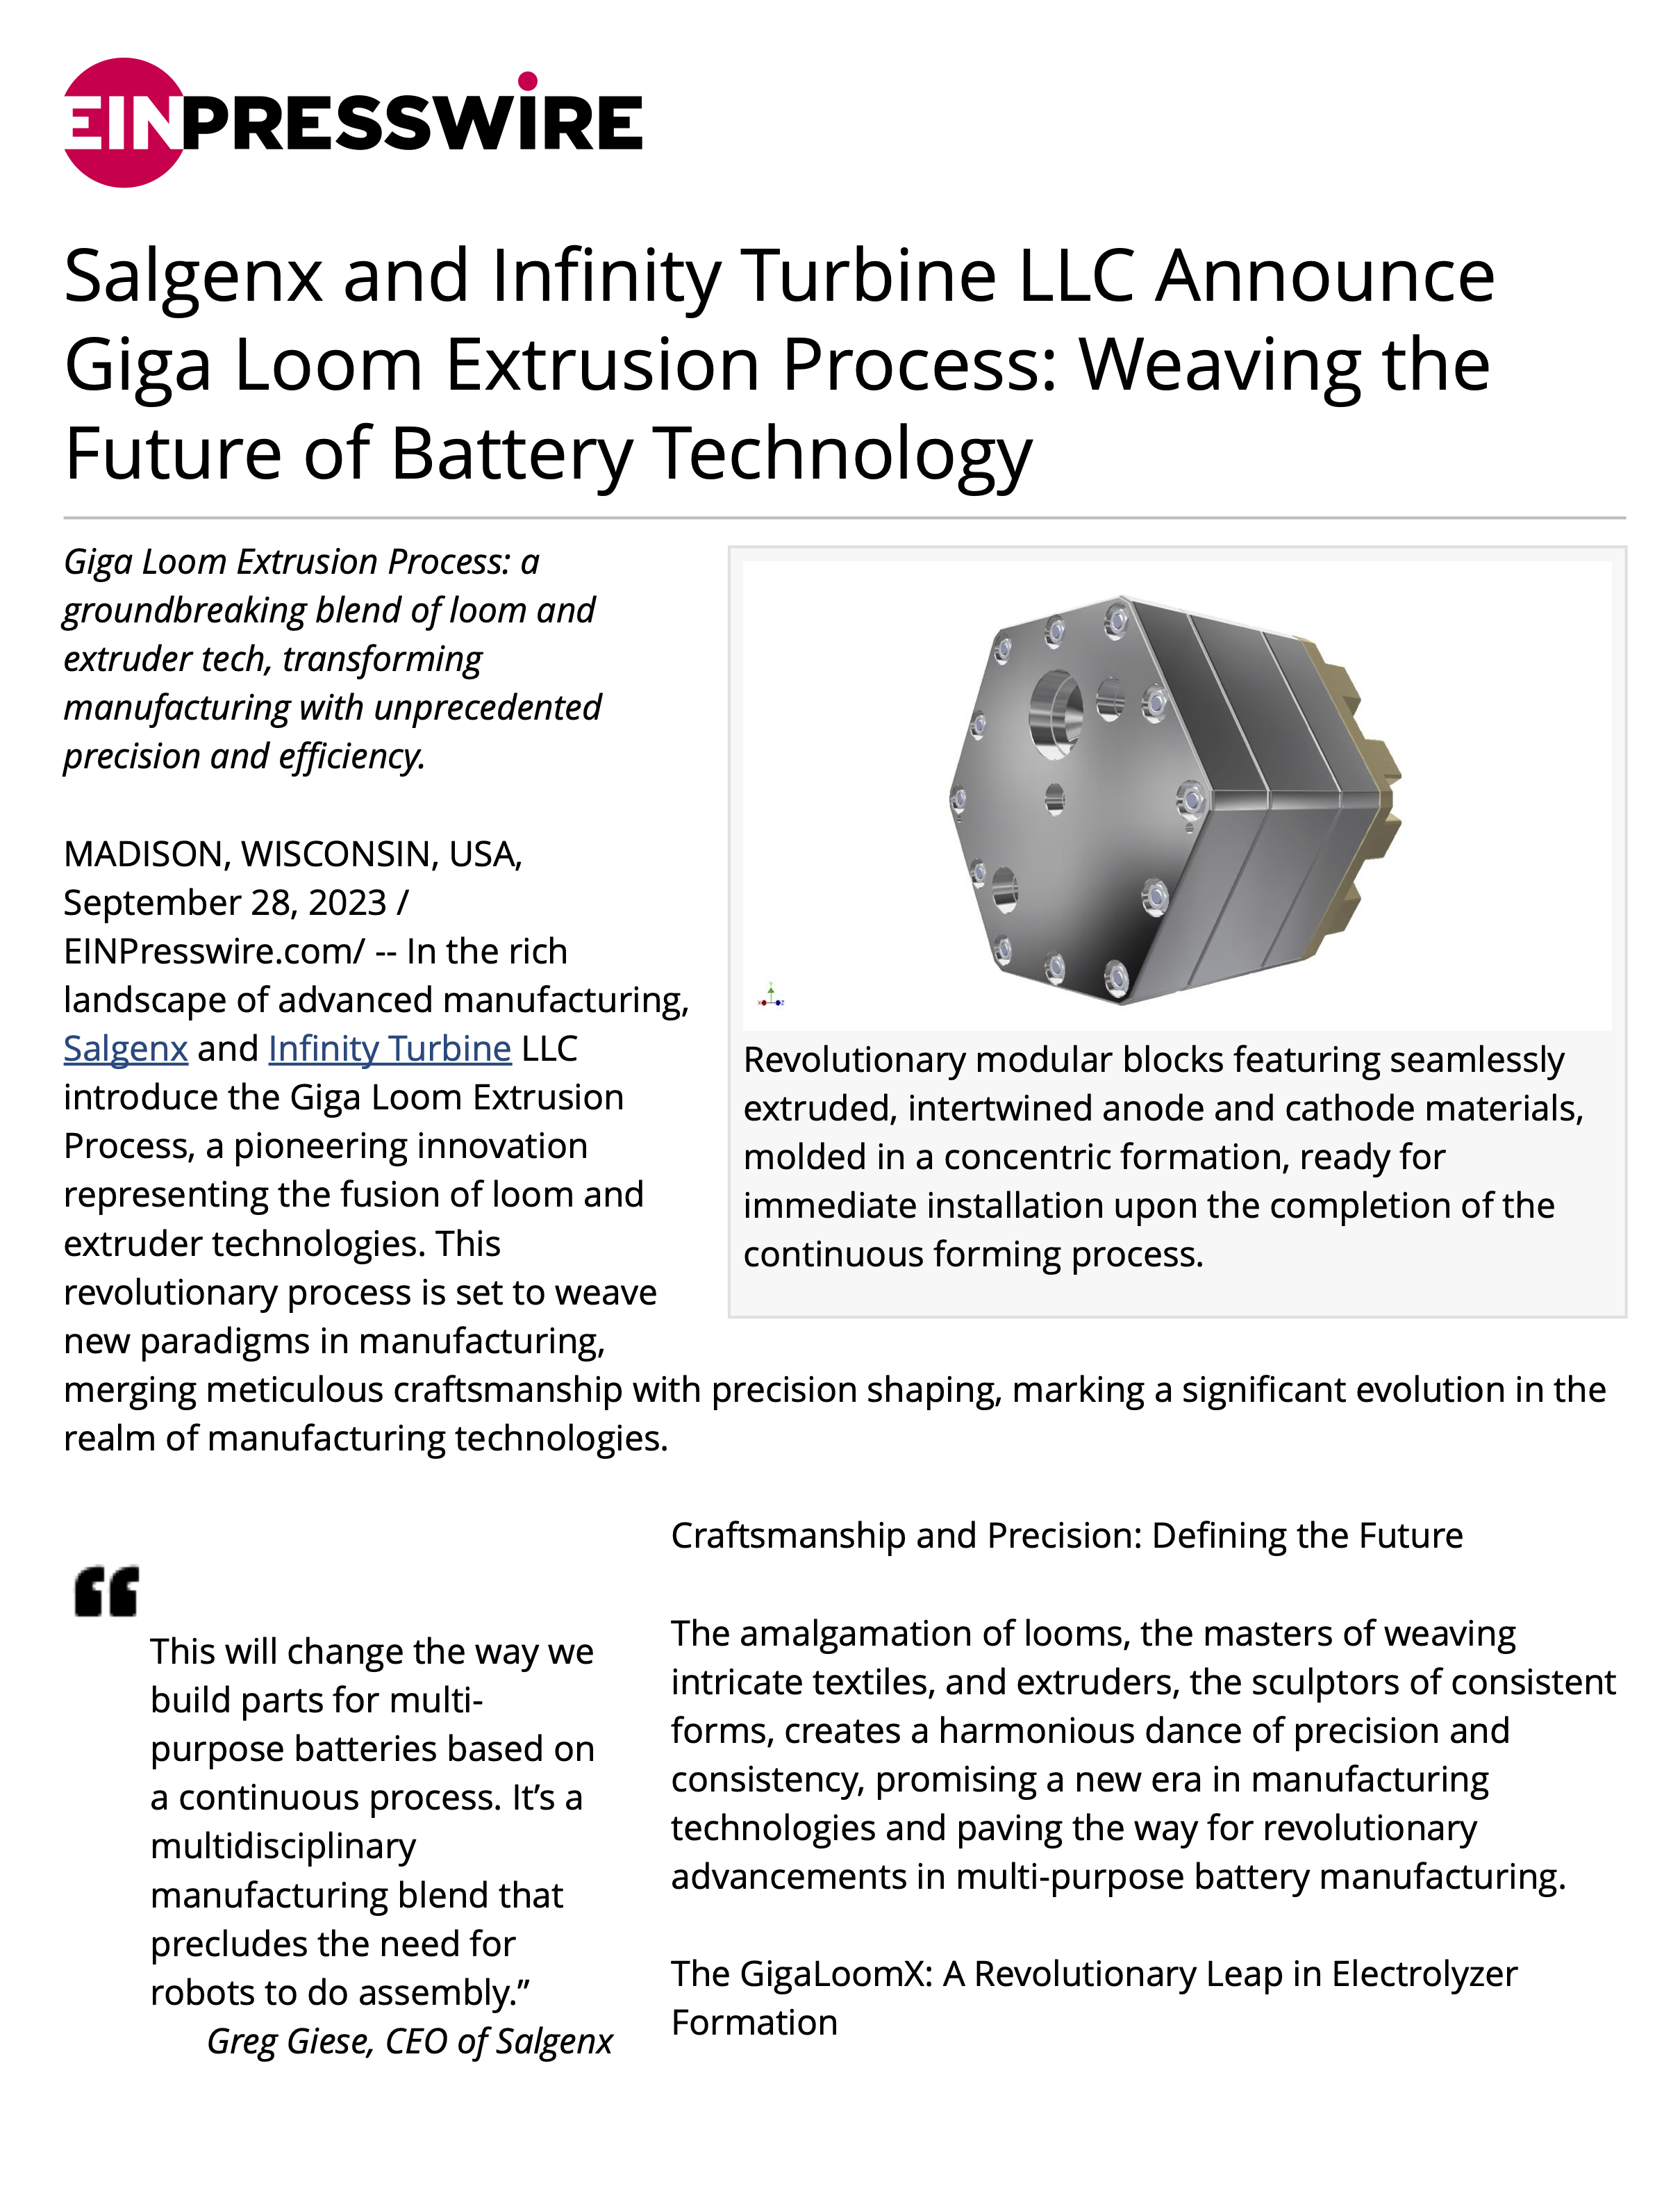 Salgenx and Infinity Turbine LLC Announce Giga Loom Extrusion Process: Weaving the Future of Battery Technology